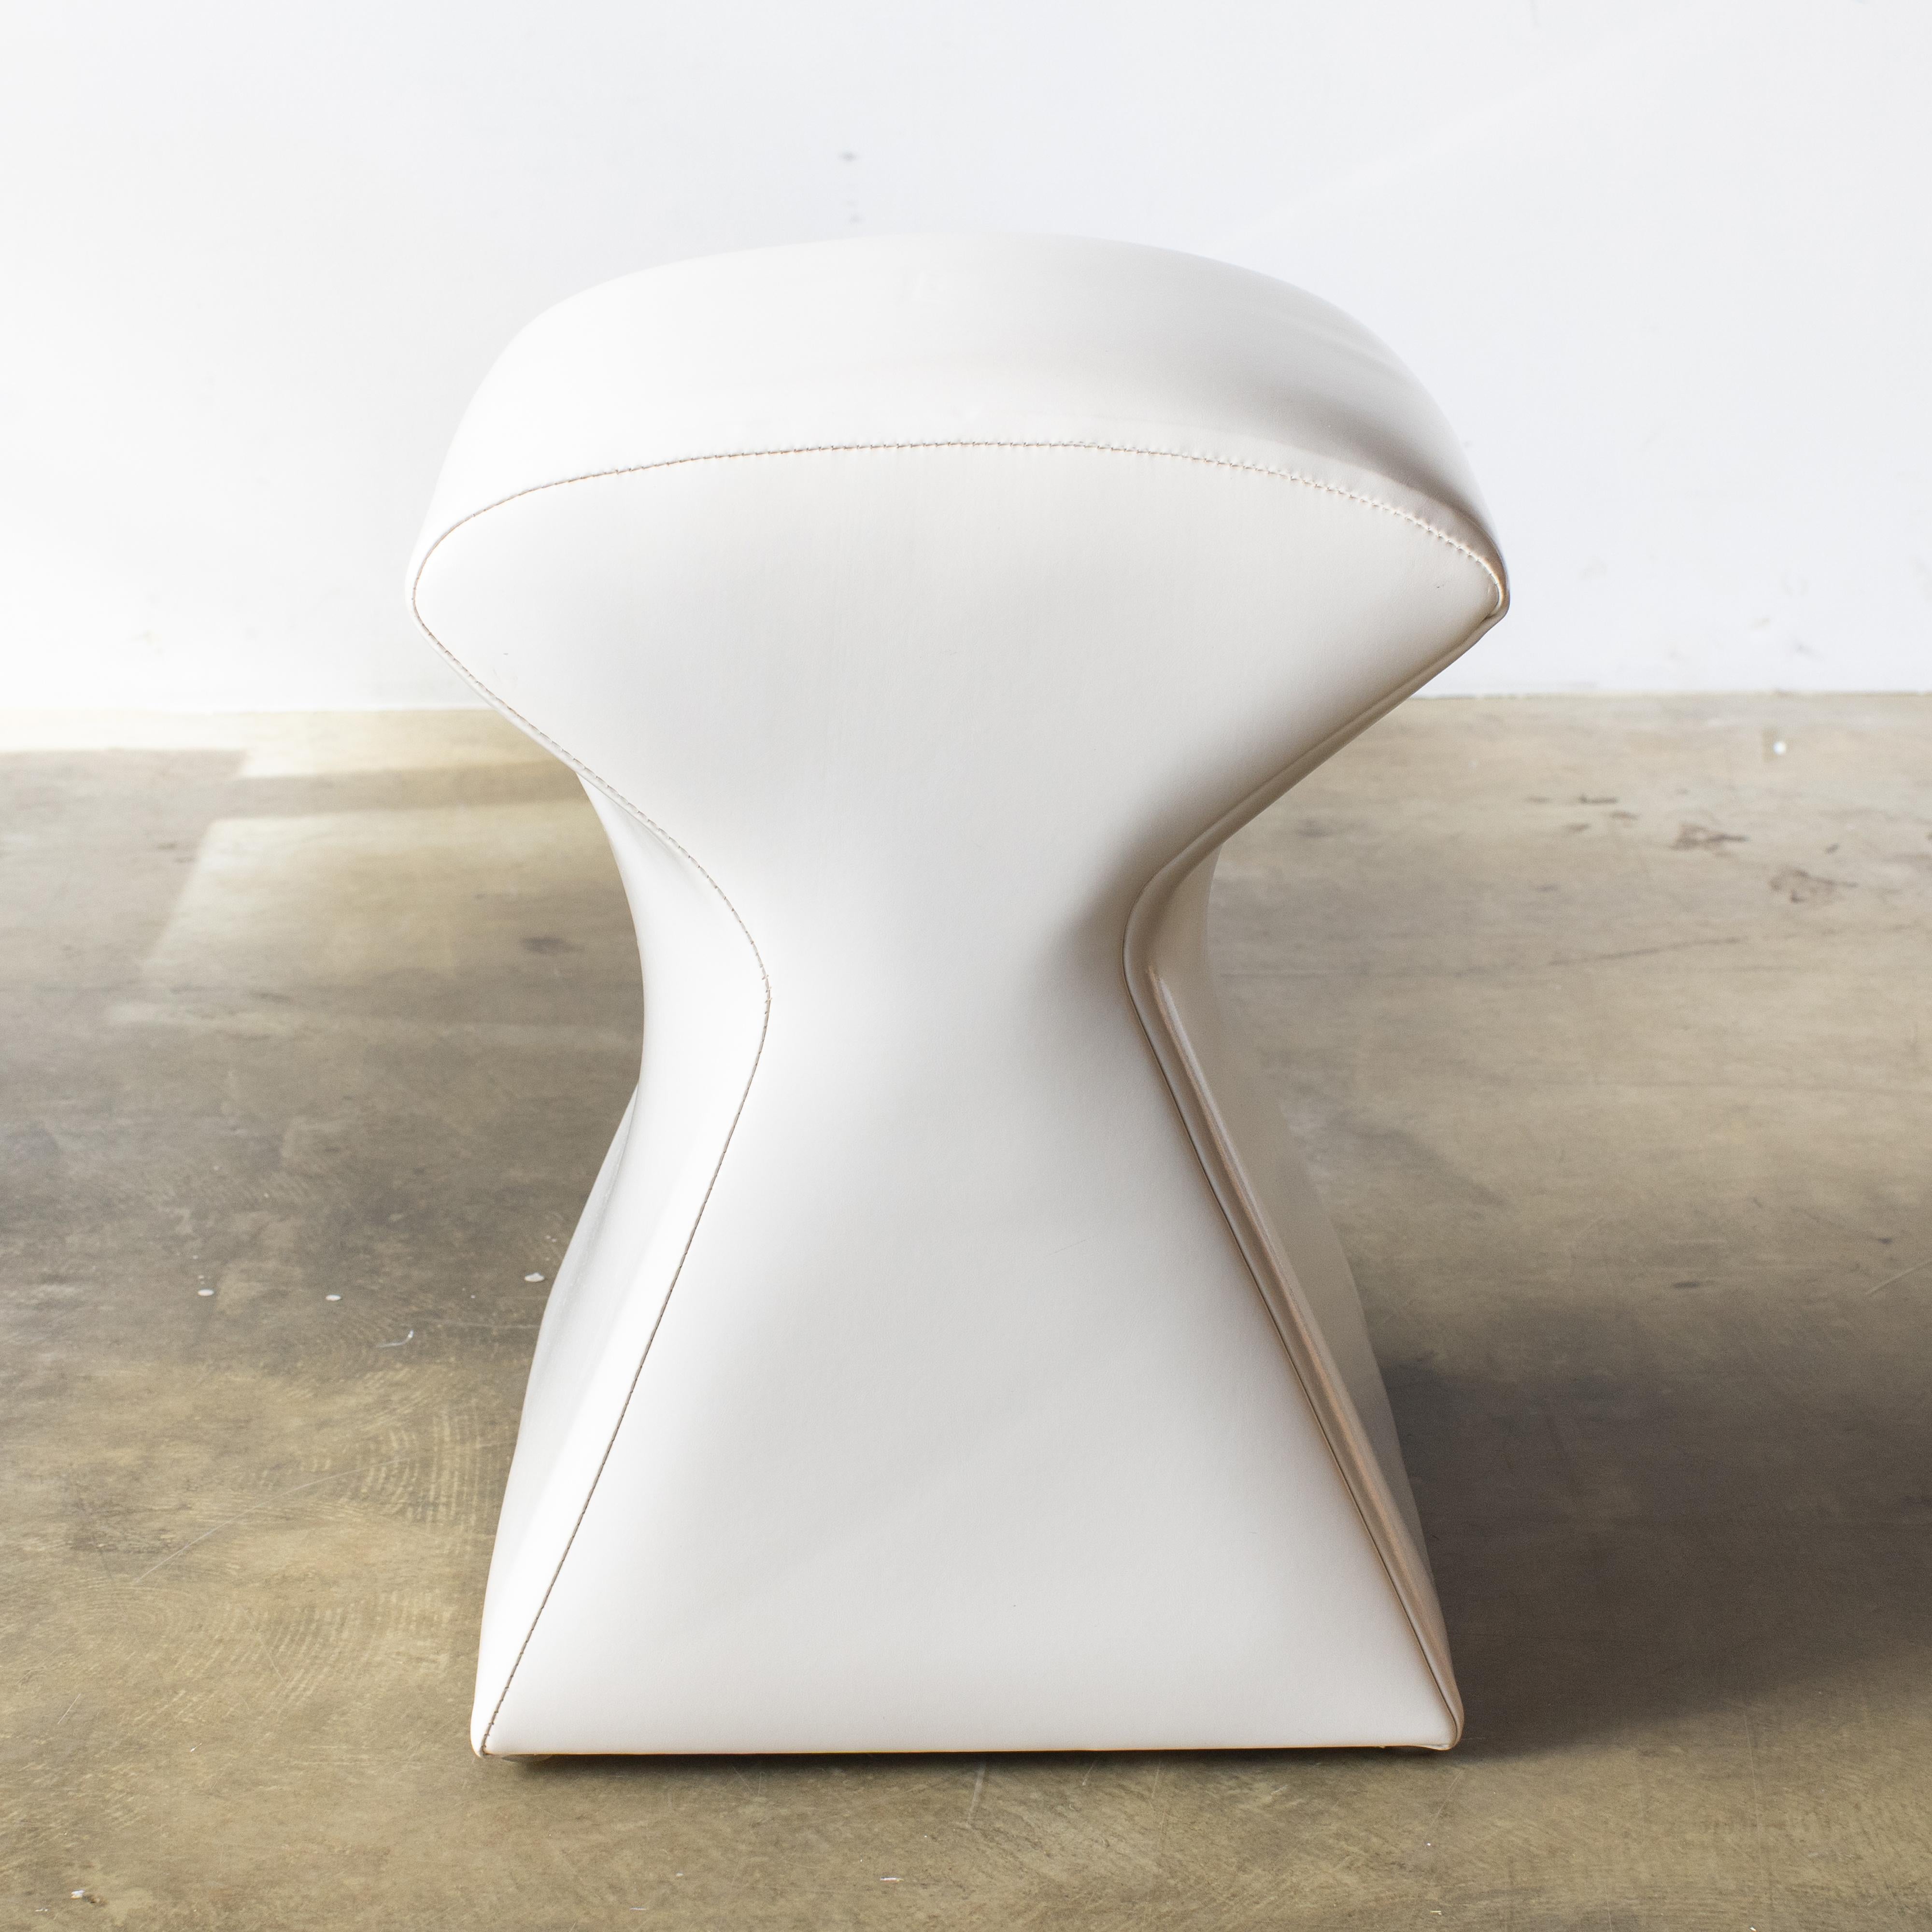 Shroom designed by Karim Rashid for Idee, Japan. This is one of Karim Rashid furniture produced by Idee in the 90s to early 2000s. Designed in 1998. Upholstered in original enamel white fabric.